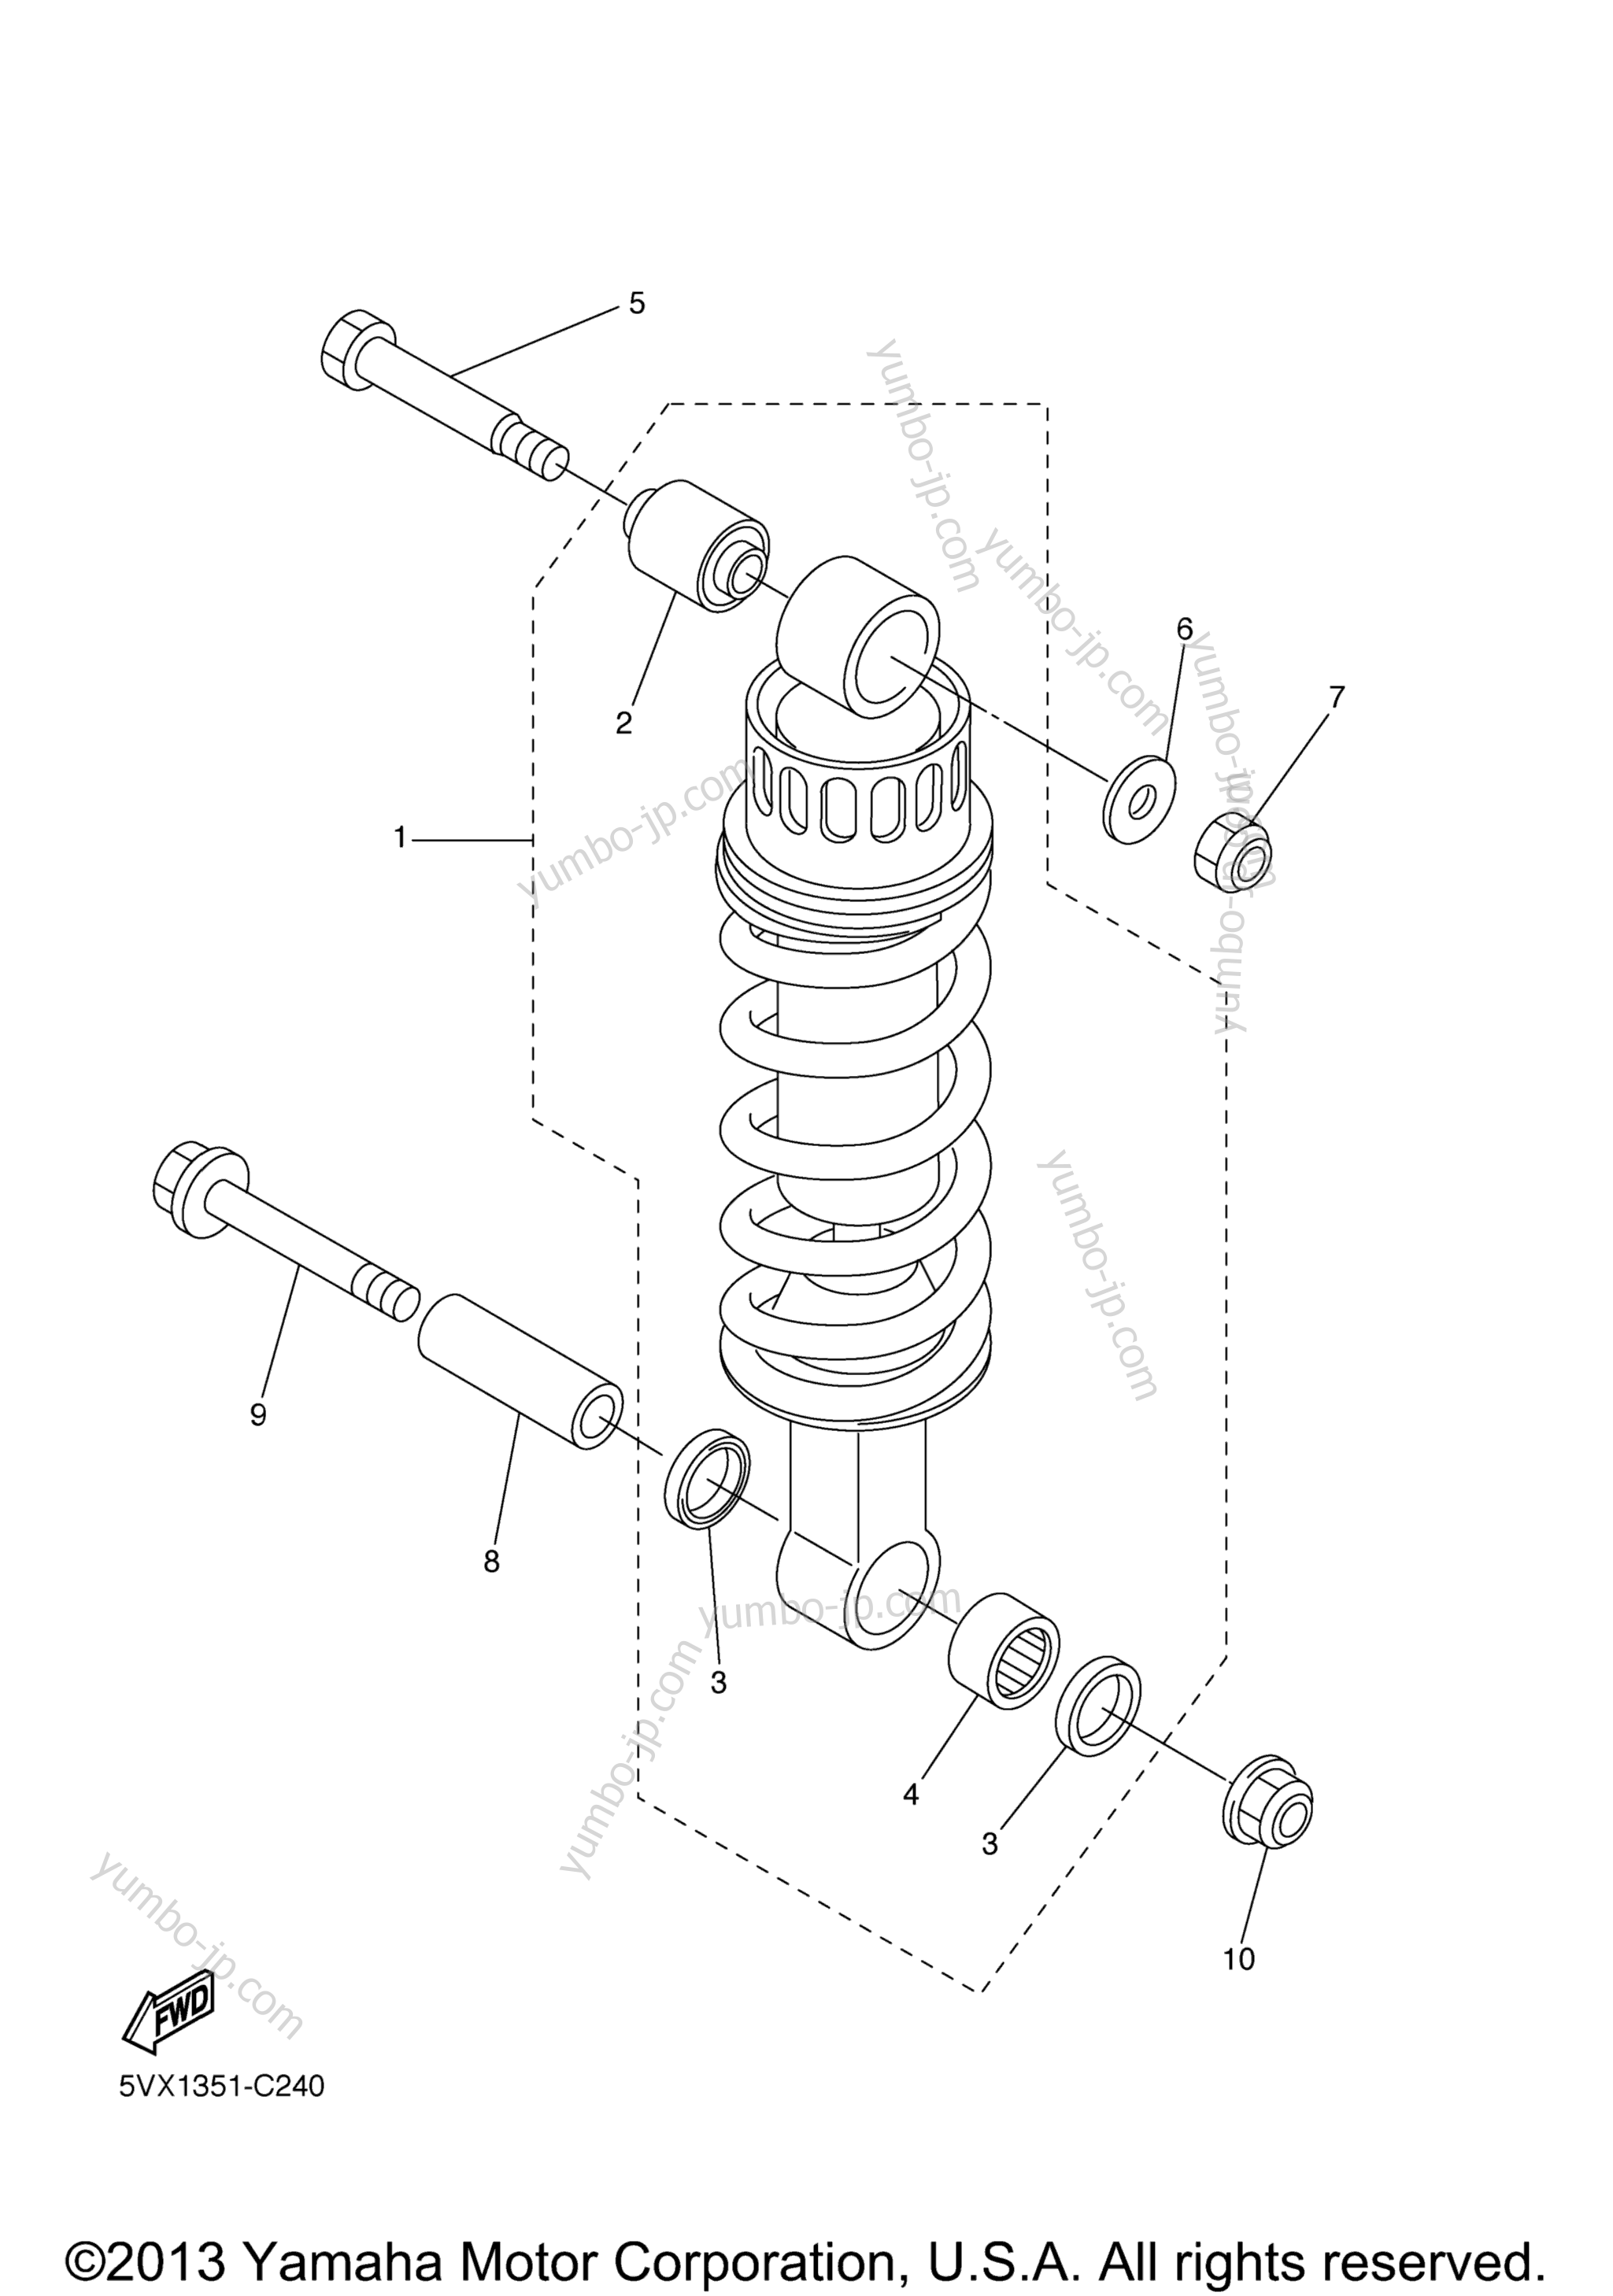 Rear Suspension for motorcycles YAMAHA FZ6 (FZS6YL) 2009 year